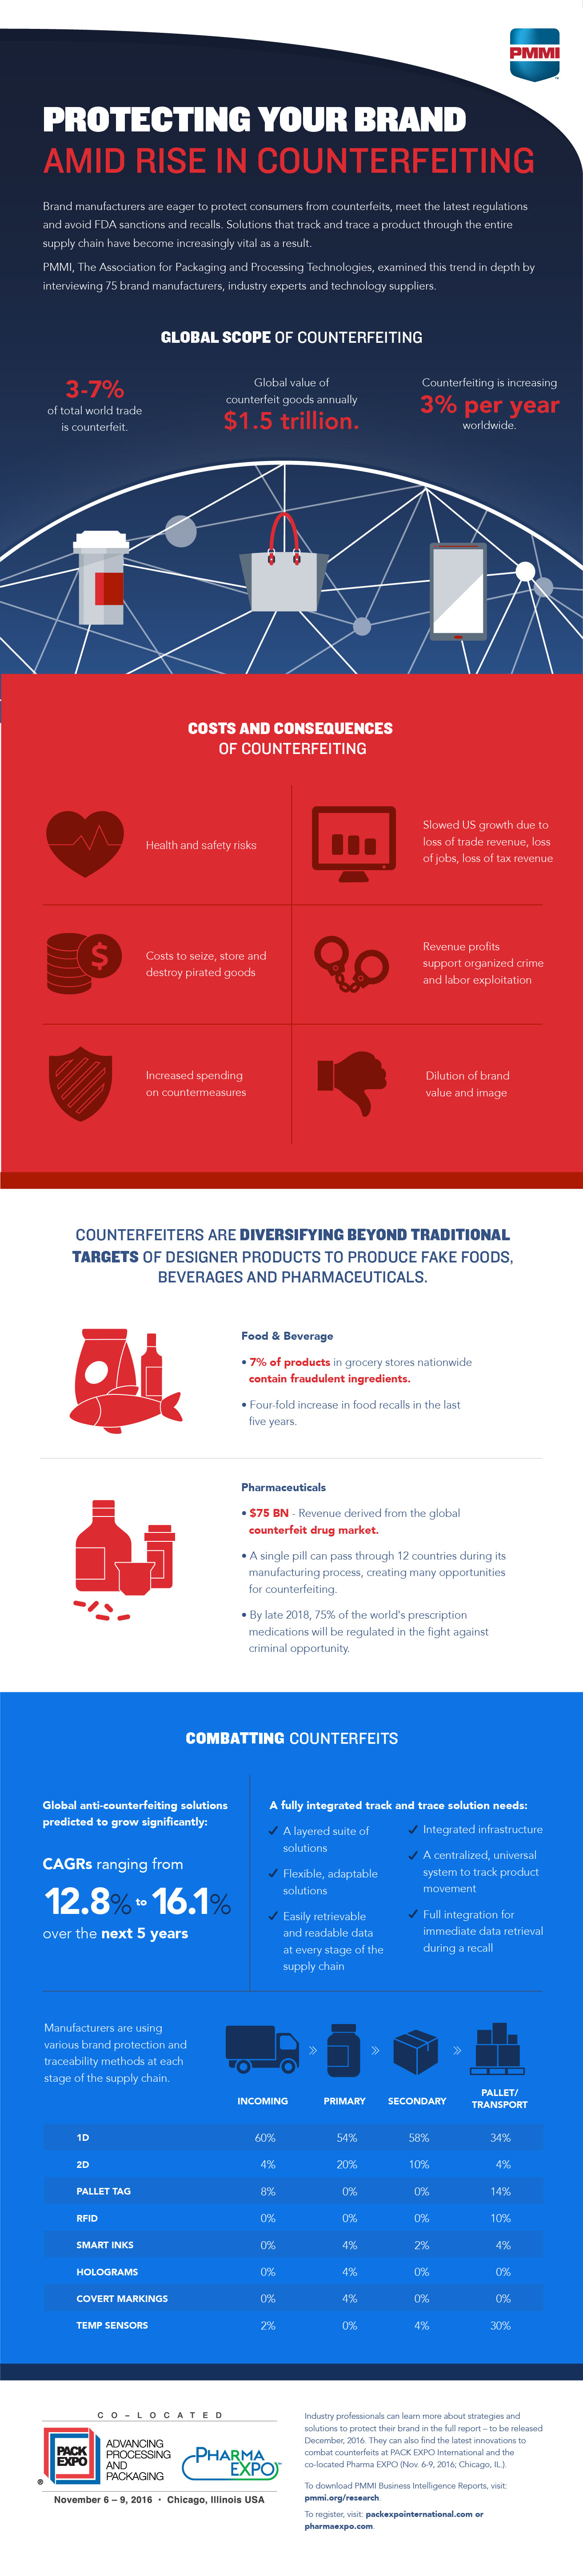 Brand Protection and Product Traceability Market Research Report Infographic